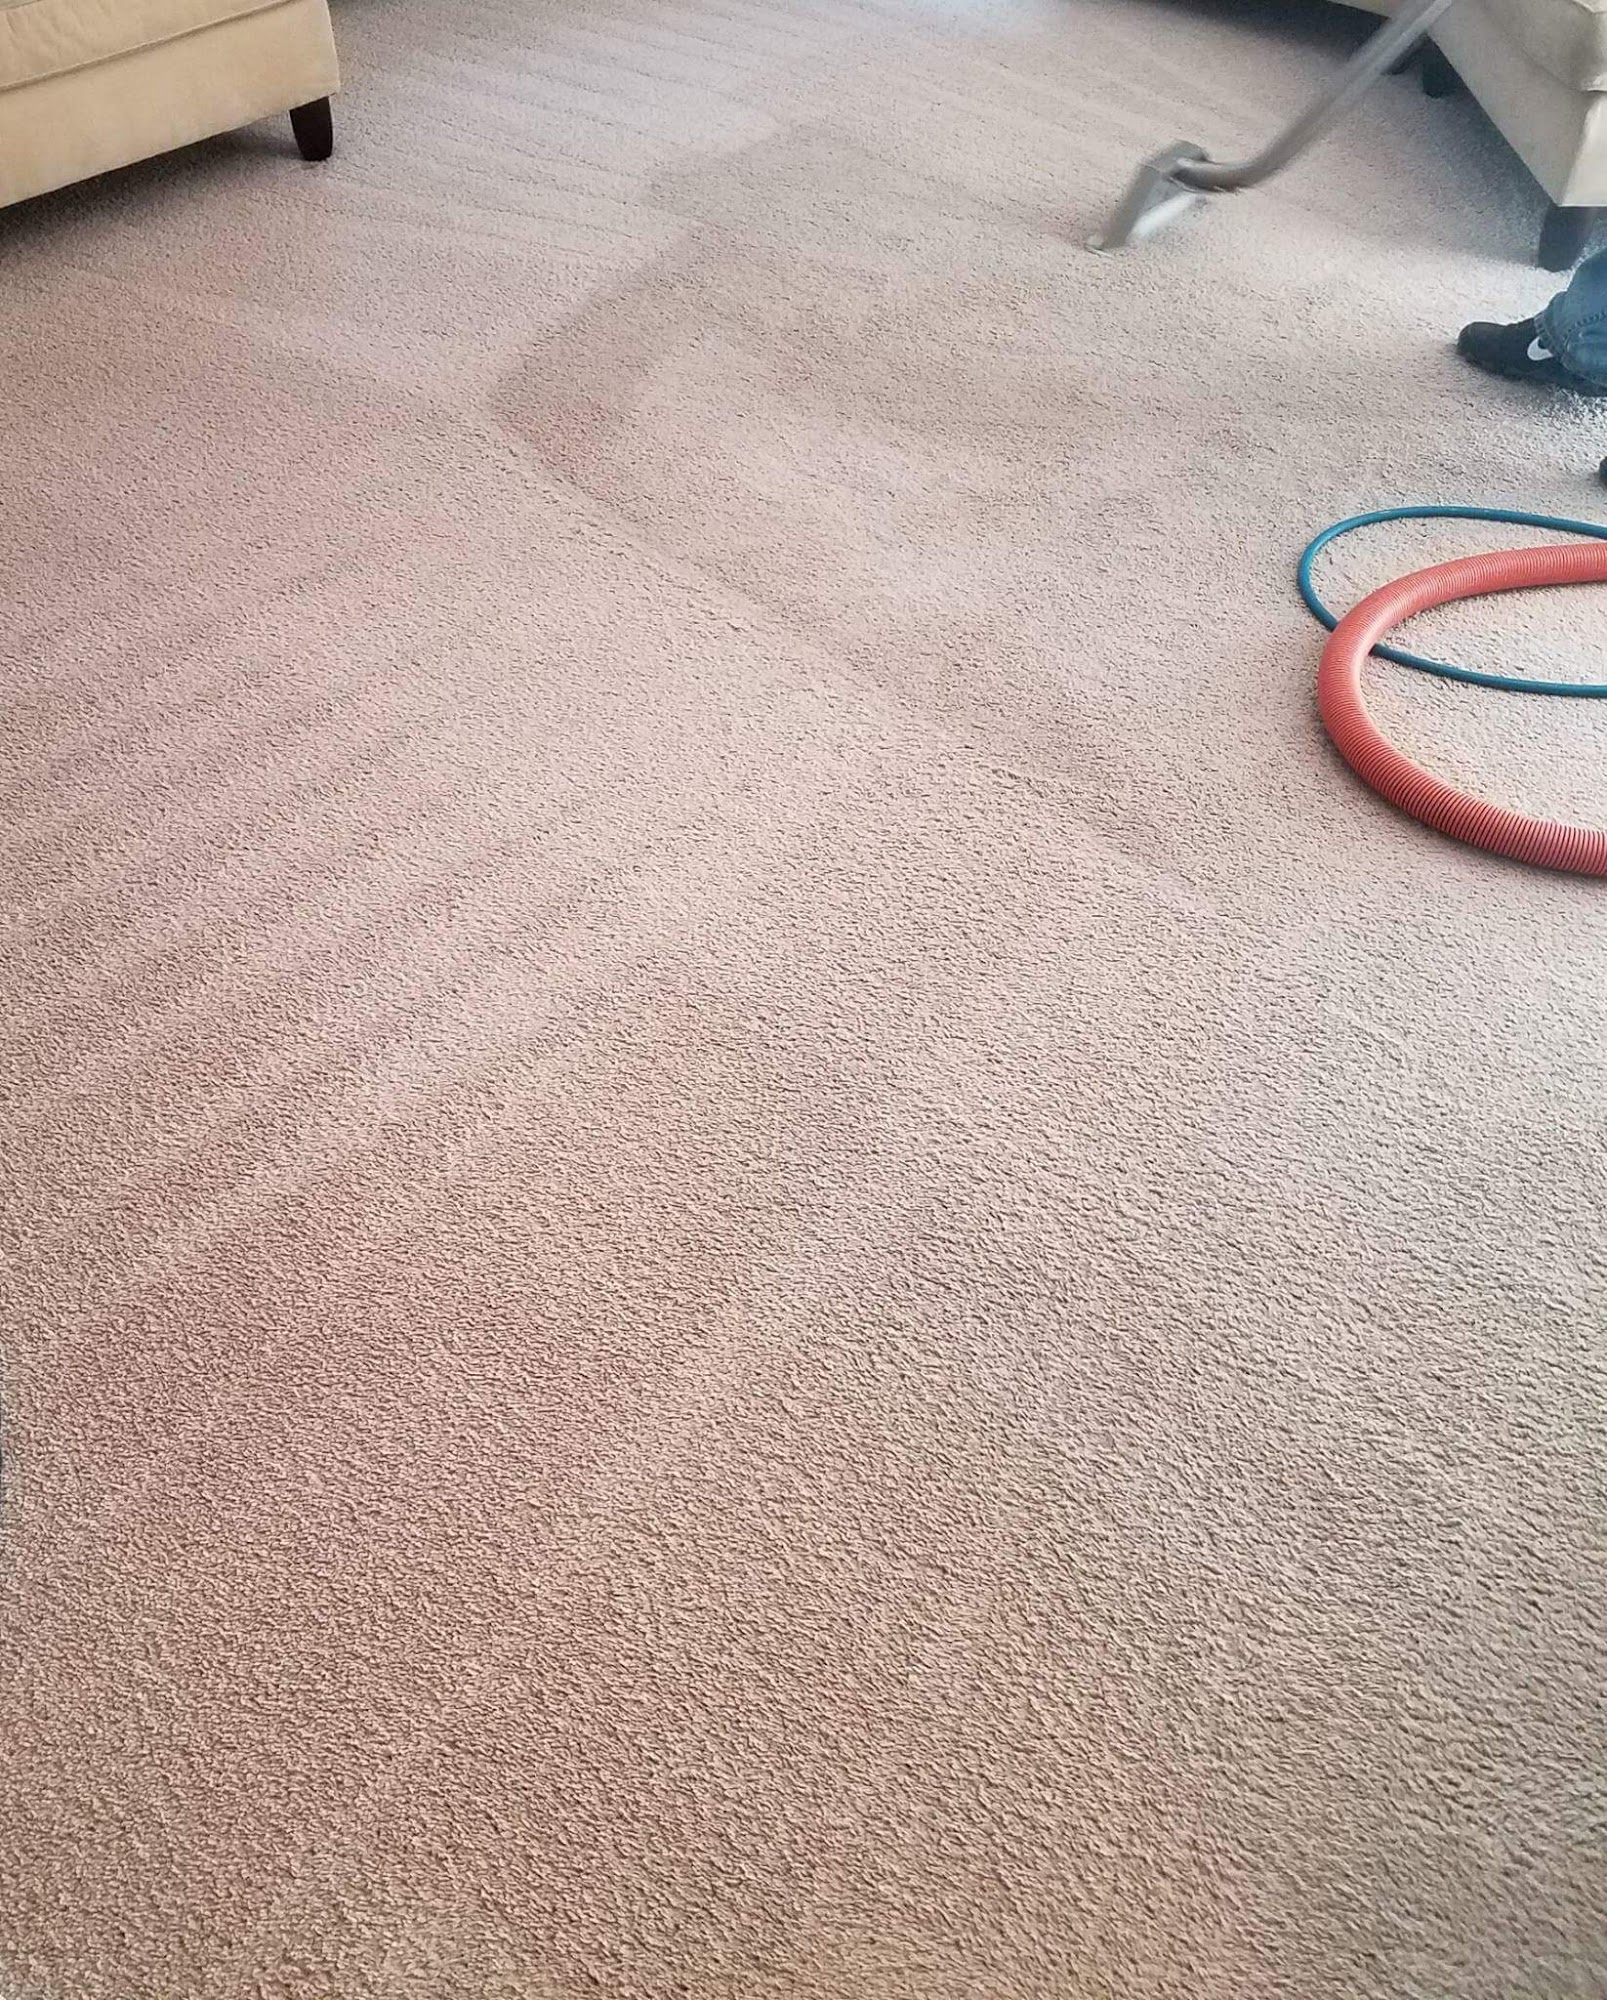 Tru-Steam Carpet & Upholstery Cleaning